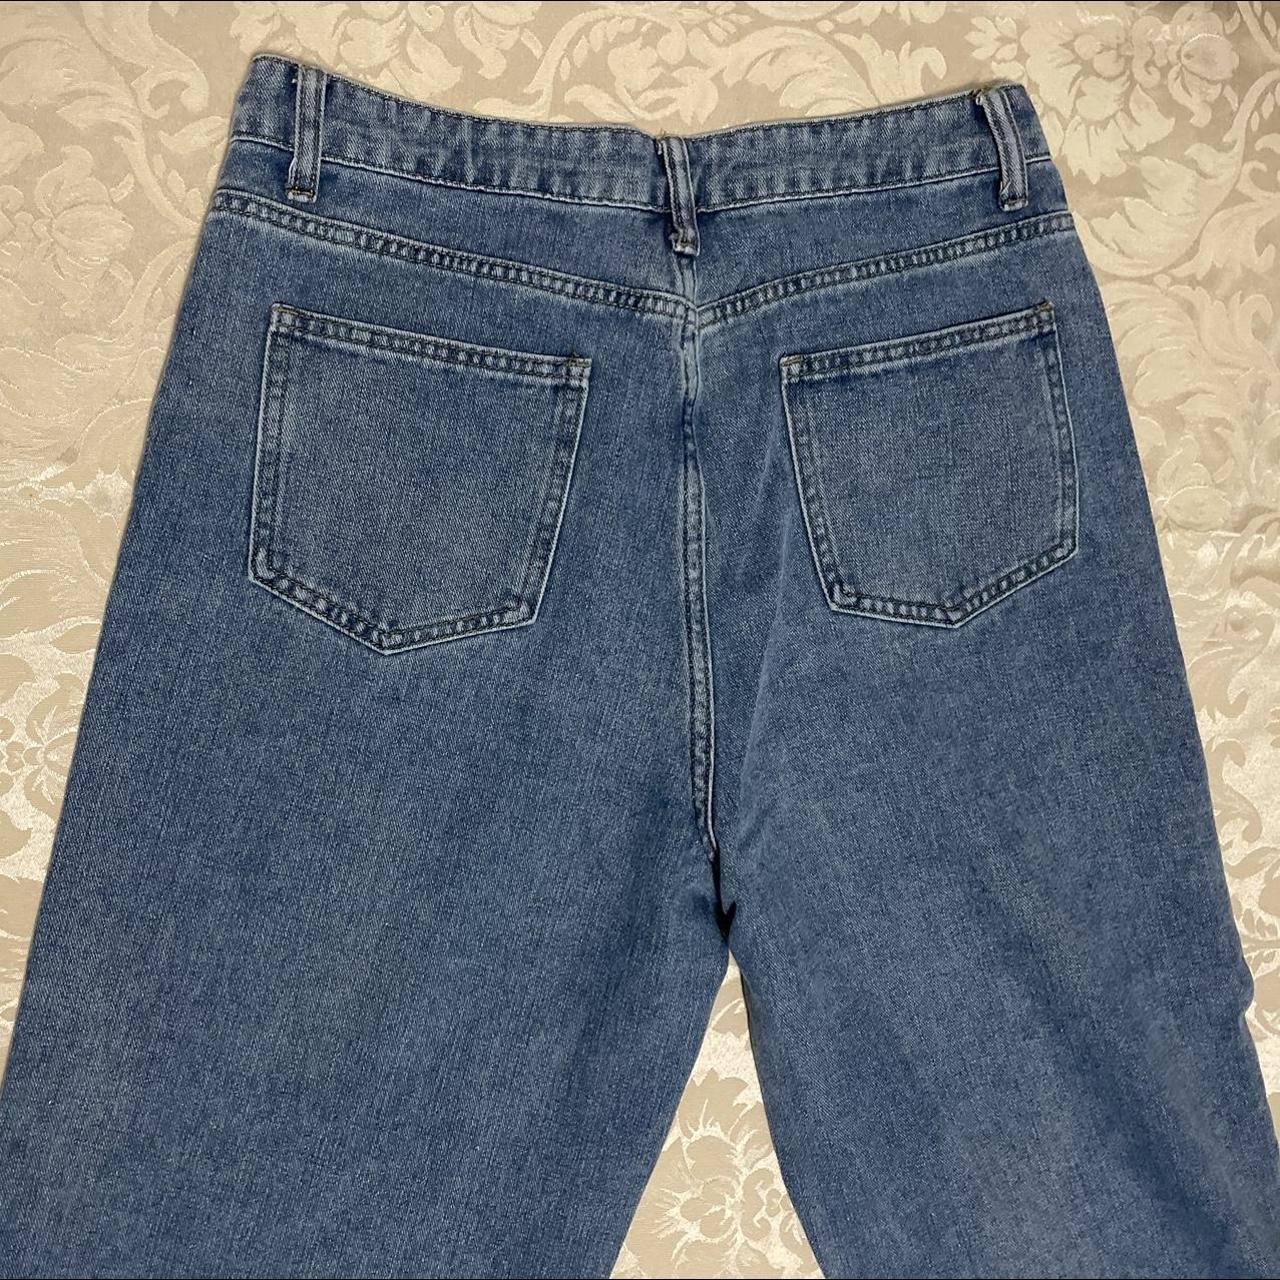 HIGH WAISTED WIDE STRAIGHT LEG JEANS these ARE... - Depop